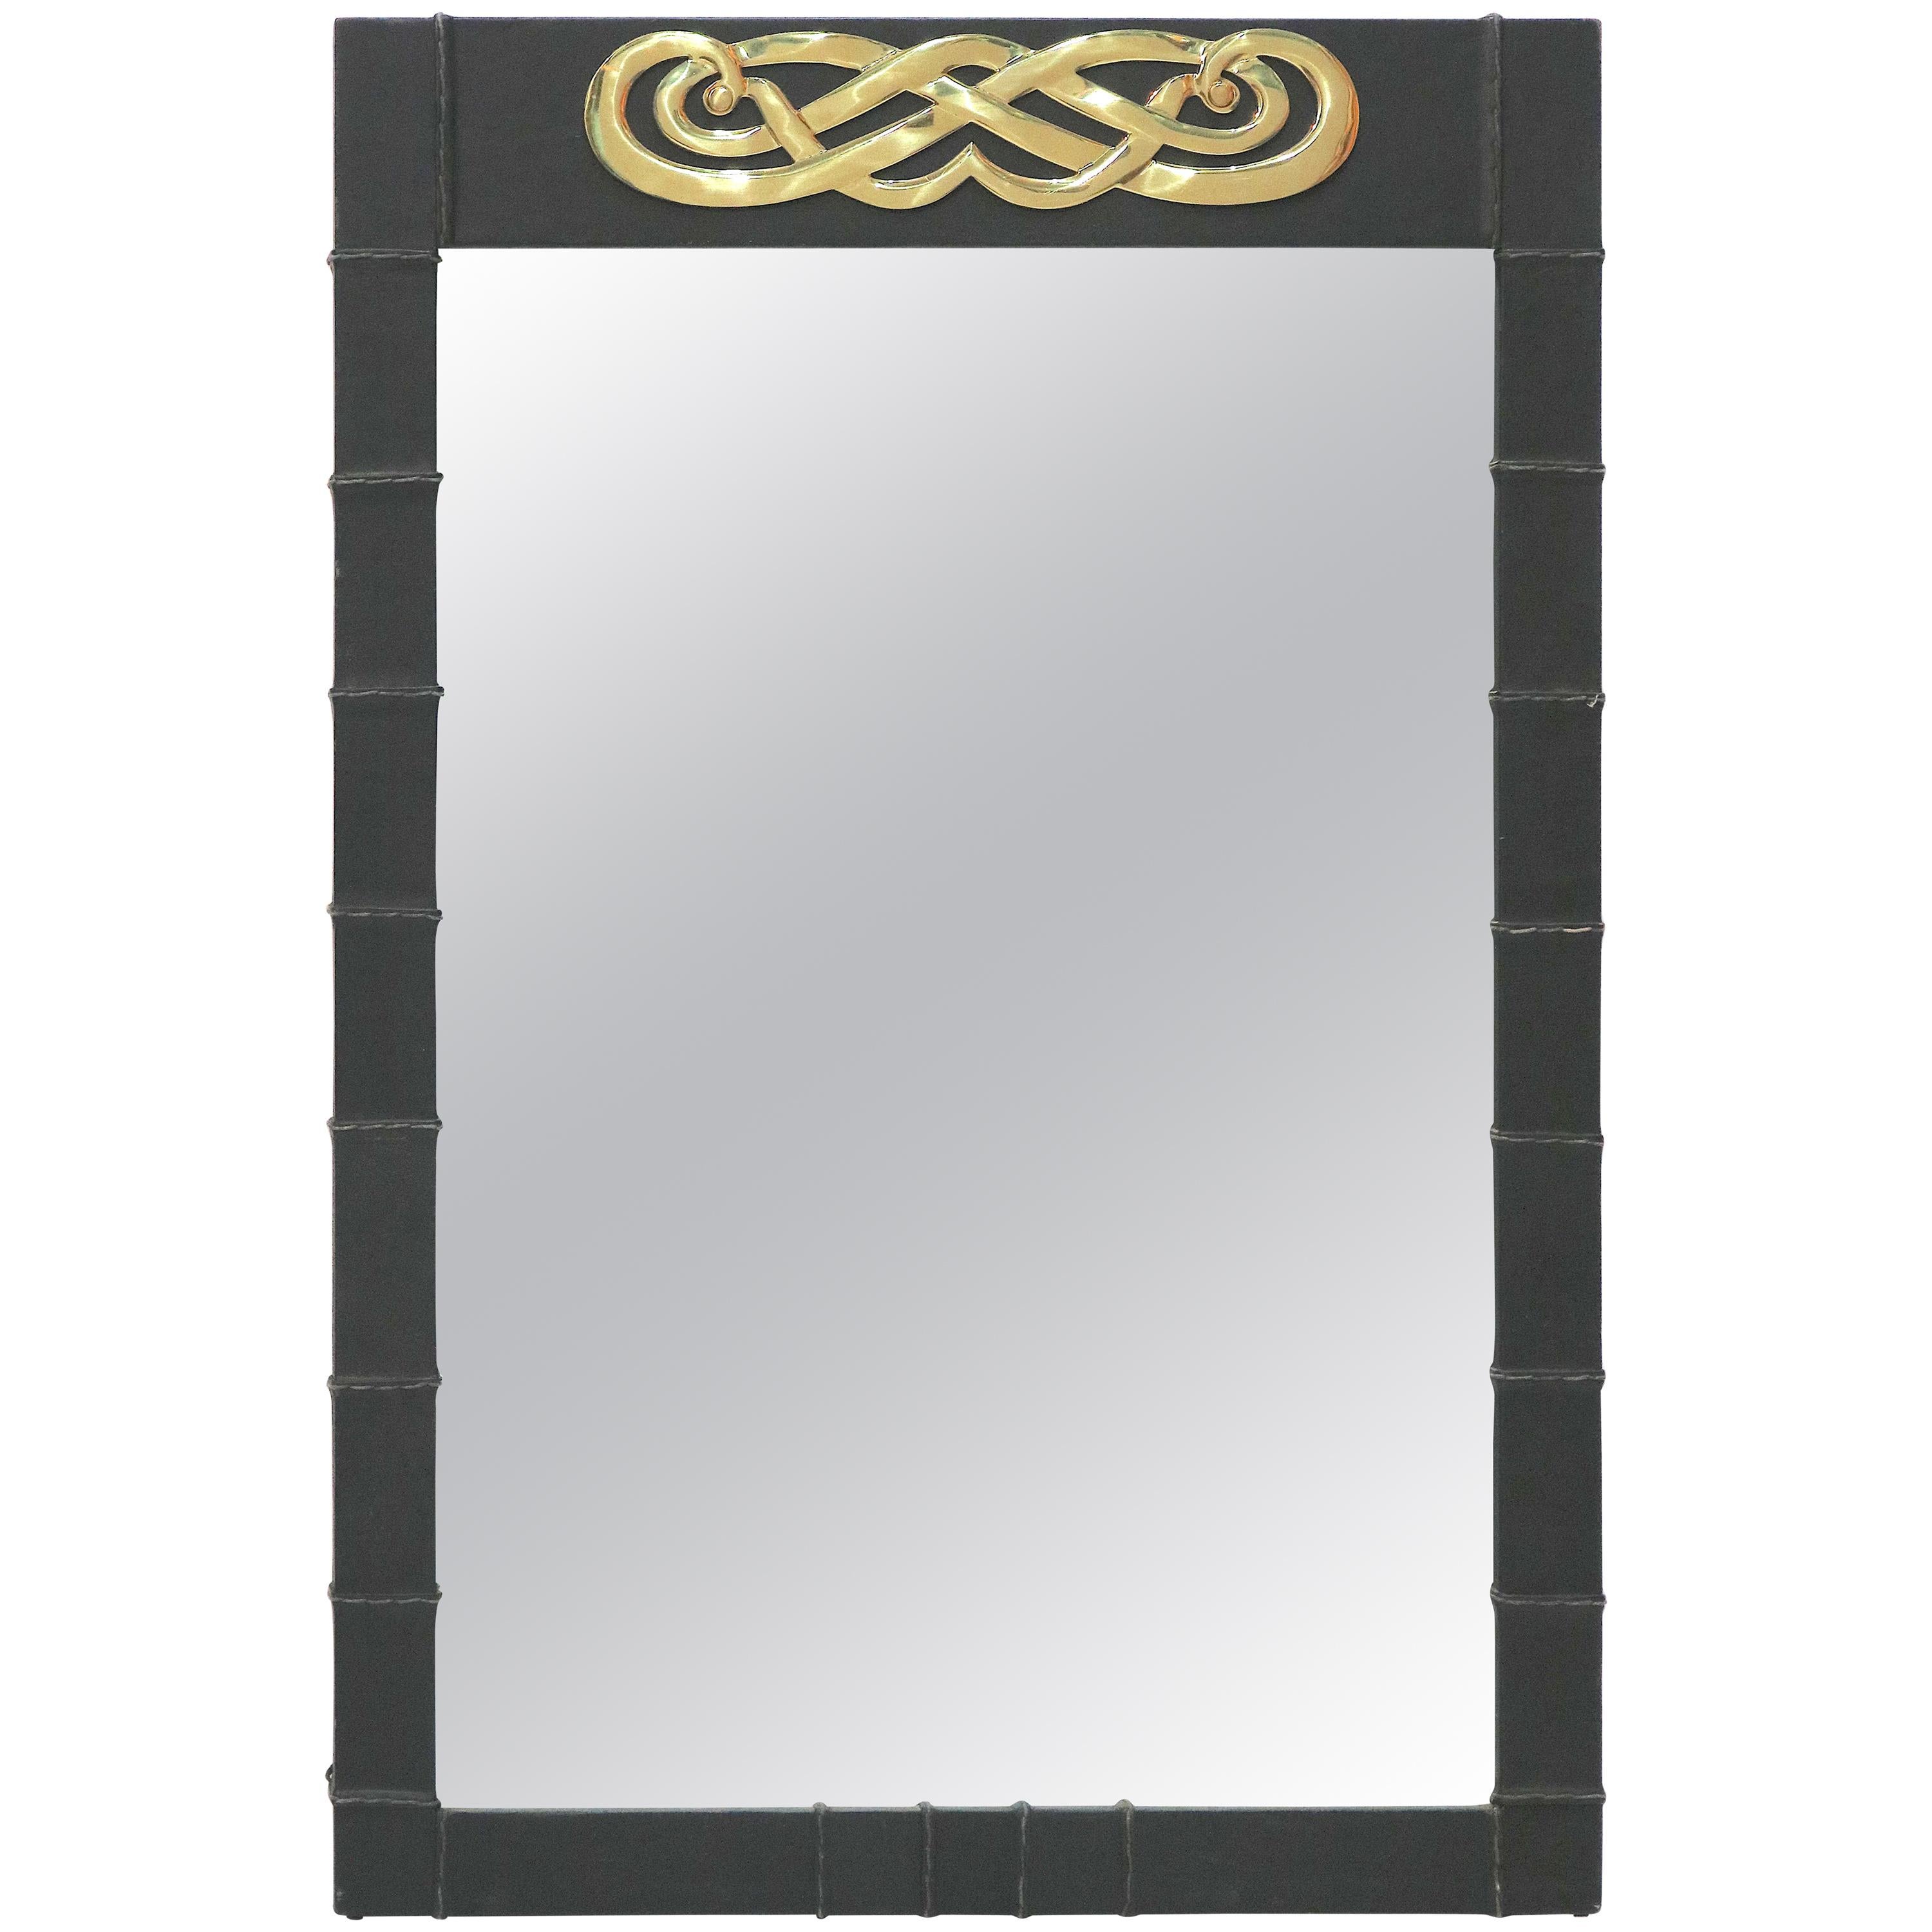 Leather Covered Mirror Interwoven Motif Brass Medallion For Sale